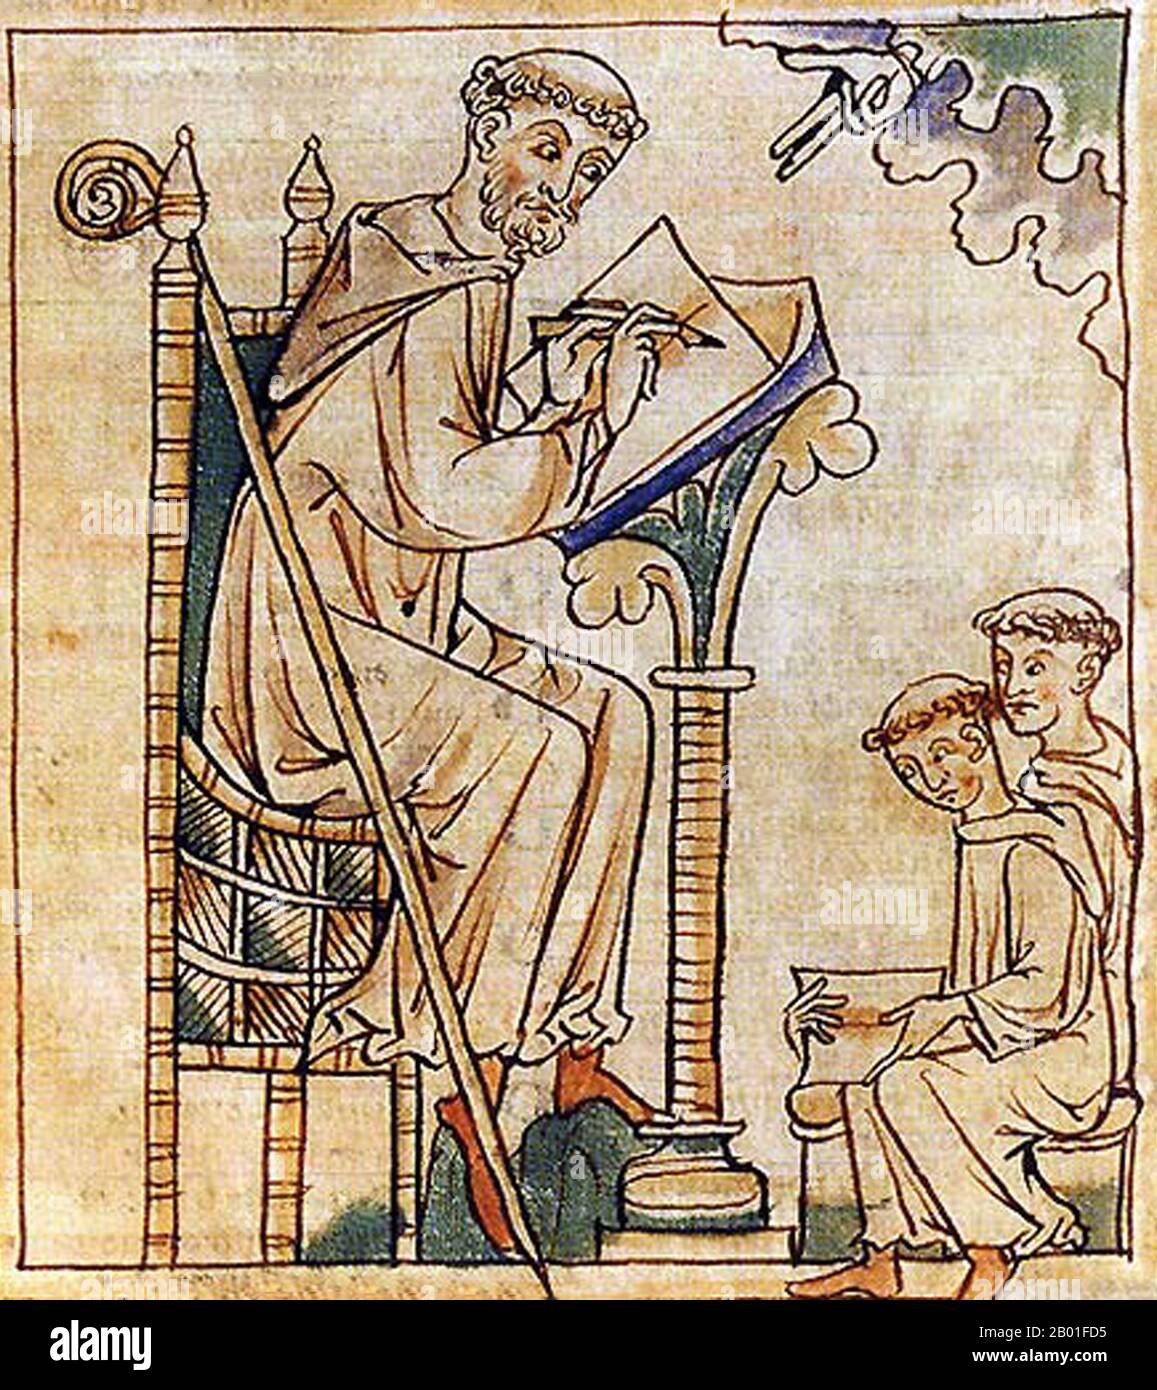 France: Coloured woodcut of St. Bernard of Clairvaux (1090 - 20 August 1153) writing a sermon, 12th century.  Bernard of Clairvaux, O.Cist was a French abbot and the primary builder of the reforming Cistercian order.  After the death of his mother, Bernard sought admission into the Cistercian order. Three years later, he was sent to found a new abbey at an isolated clearing in a glen known as the Val d'Absinthe, about 15 km southeast of Bar-sur-Aube. According to tradition, Bernard founded the monastery on 25 June 1115, naming it Claire Vallée, which evolved into Clairvaux. Stock Photo